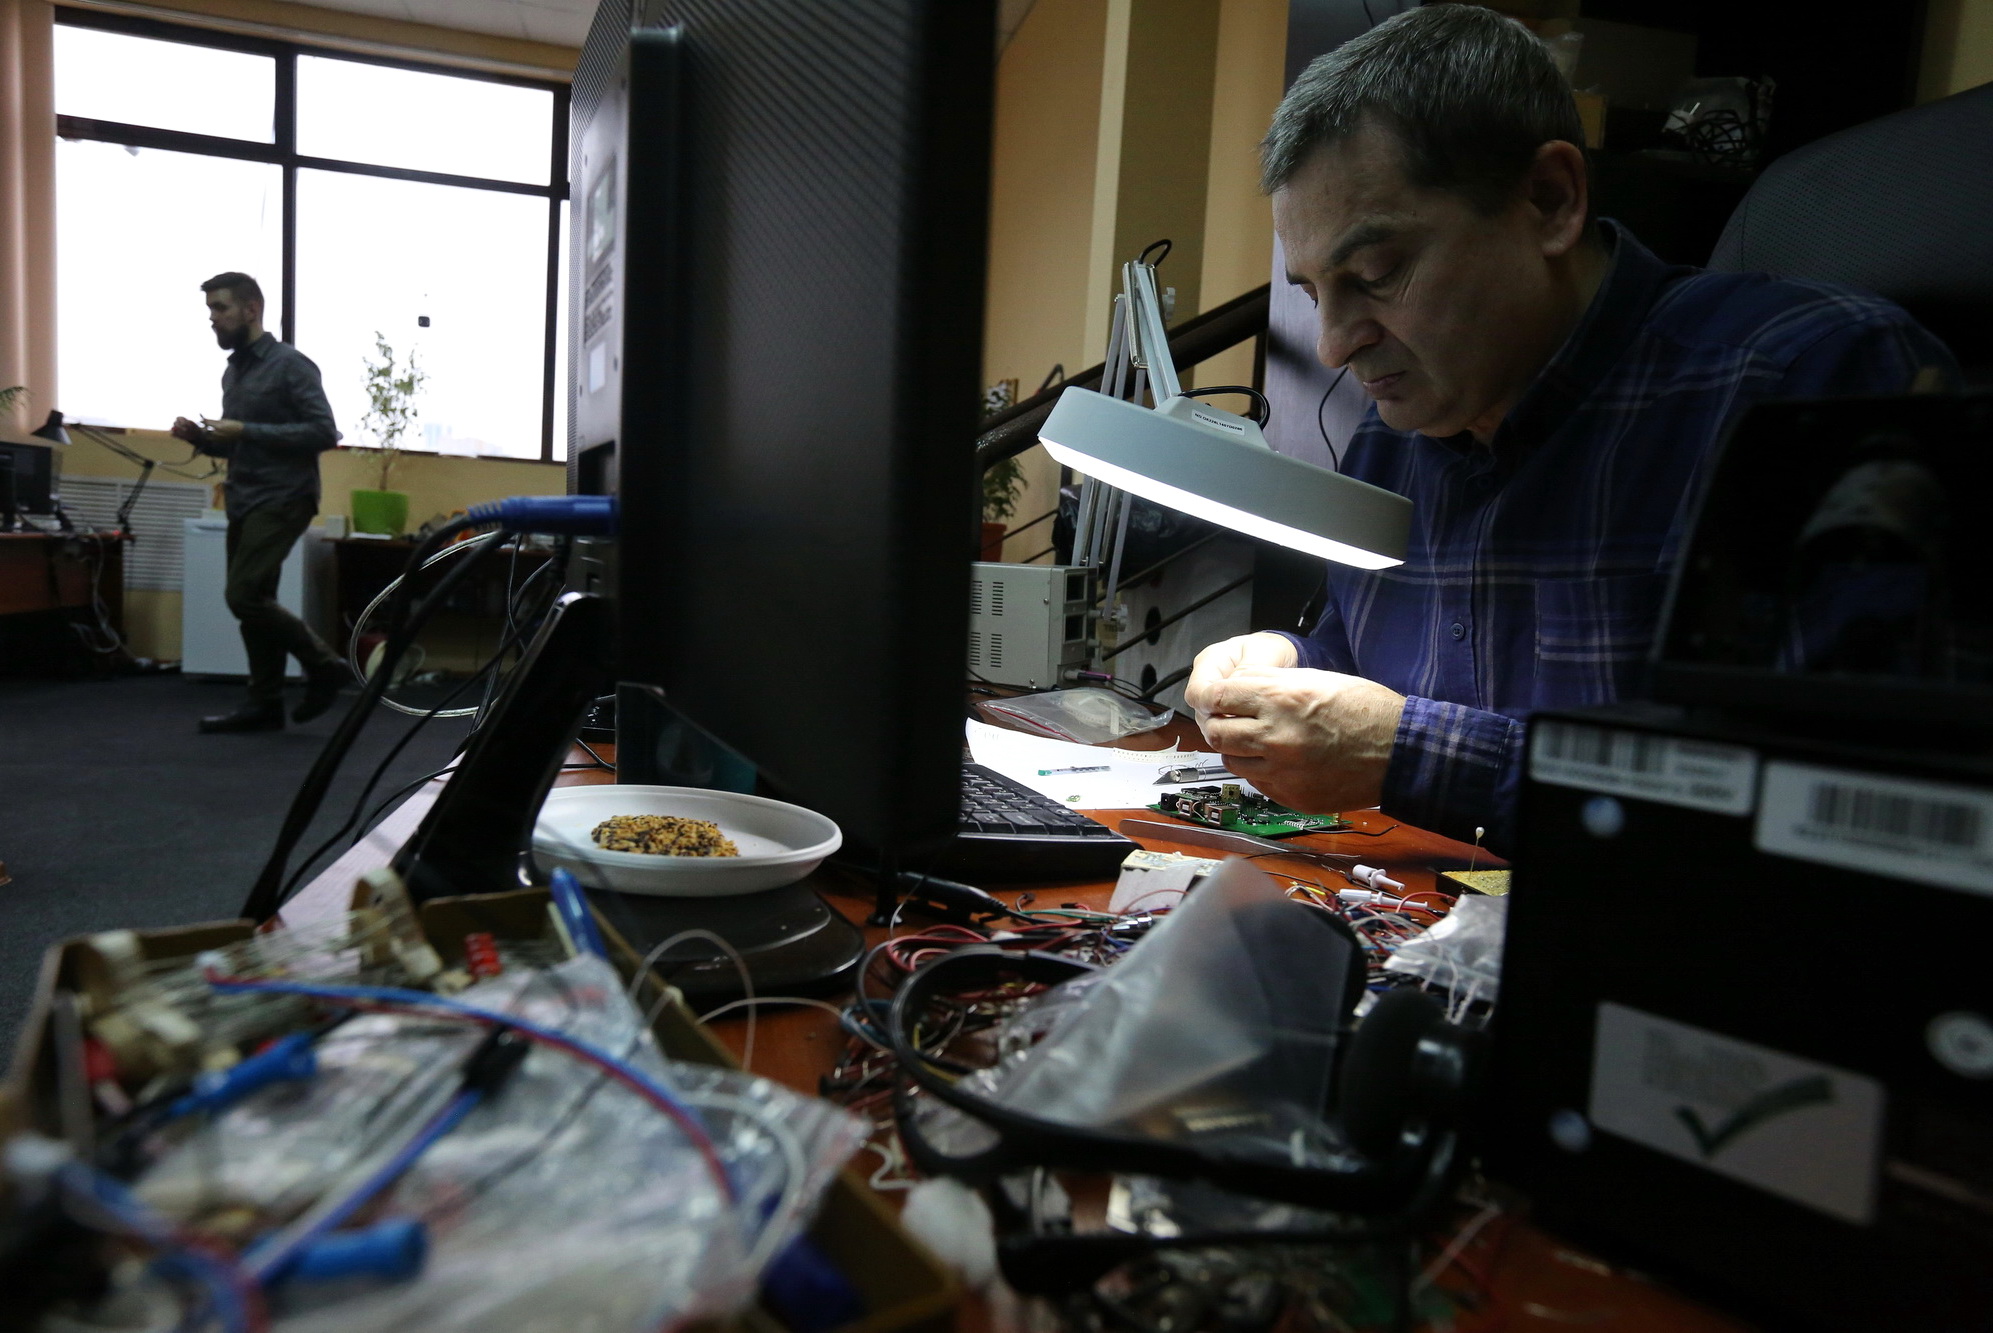 A man looks into a magnifier as he develops and assembles small parts of an Ajax security system at the company's Kyiv office on Nov. 10.